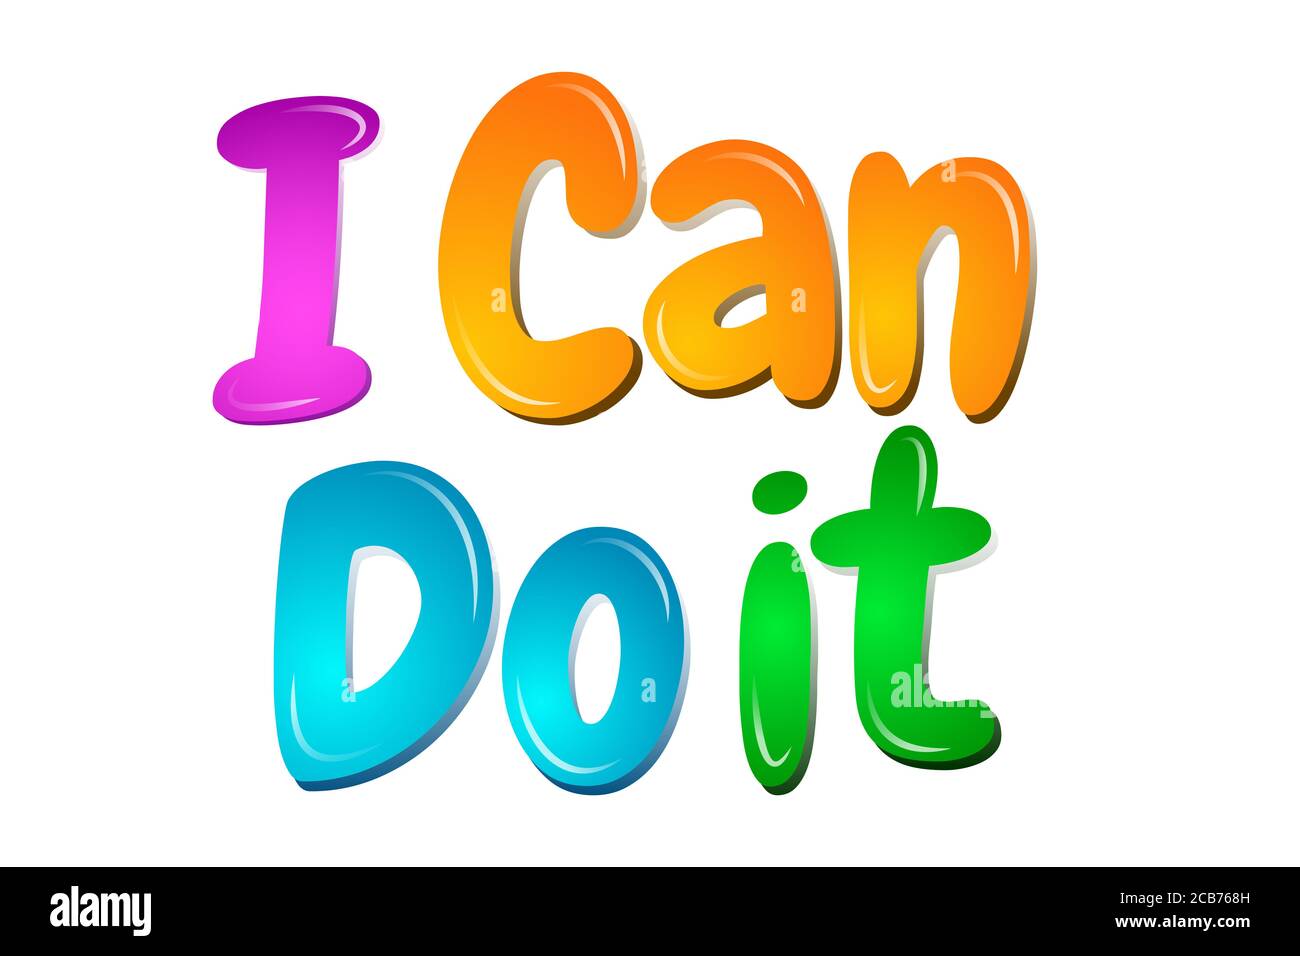 I Can Do It In Cartoon Colorful Letters Banner For Kids Stock Photo Alamy